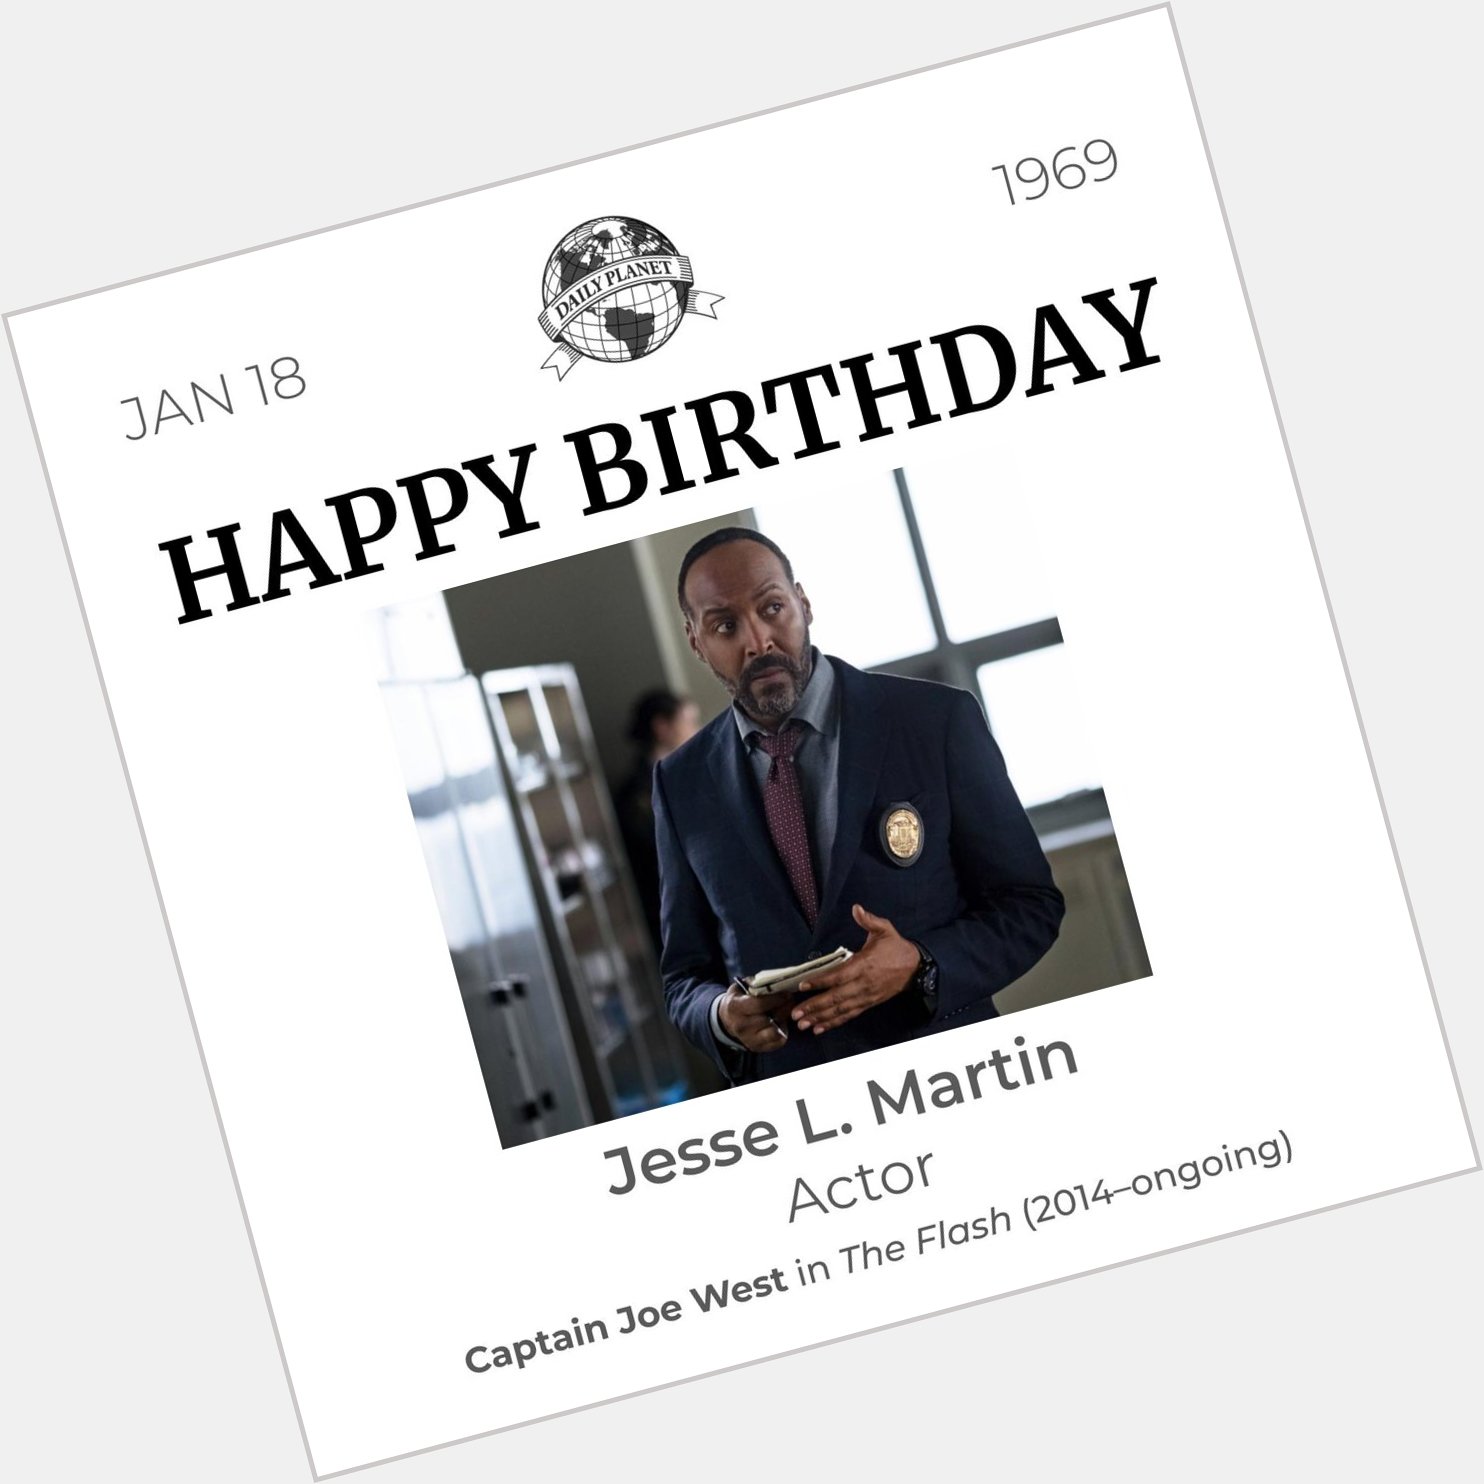 Happy birthday to the father of family, Jesse L. Martin! 